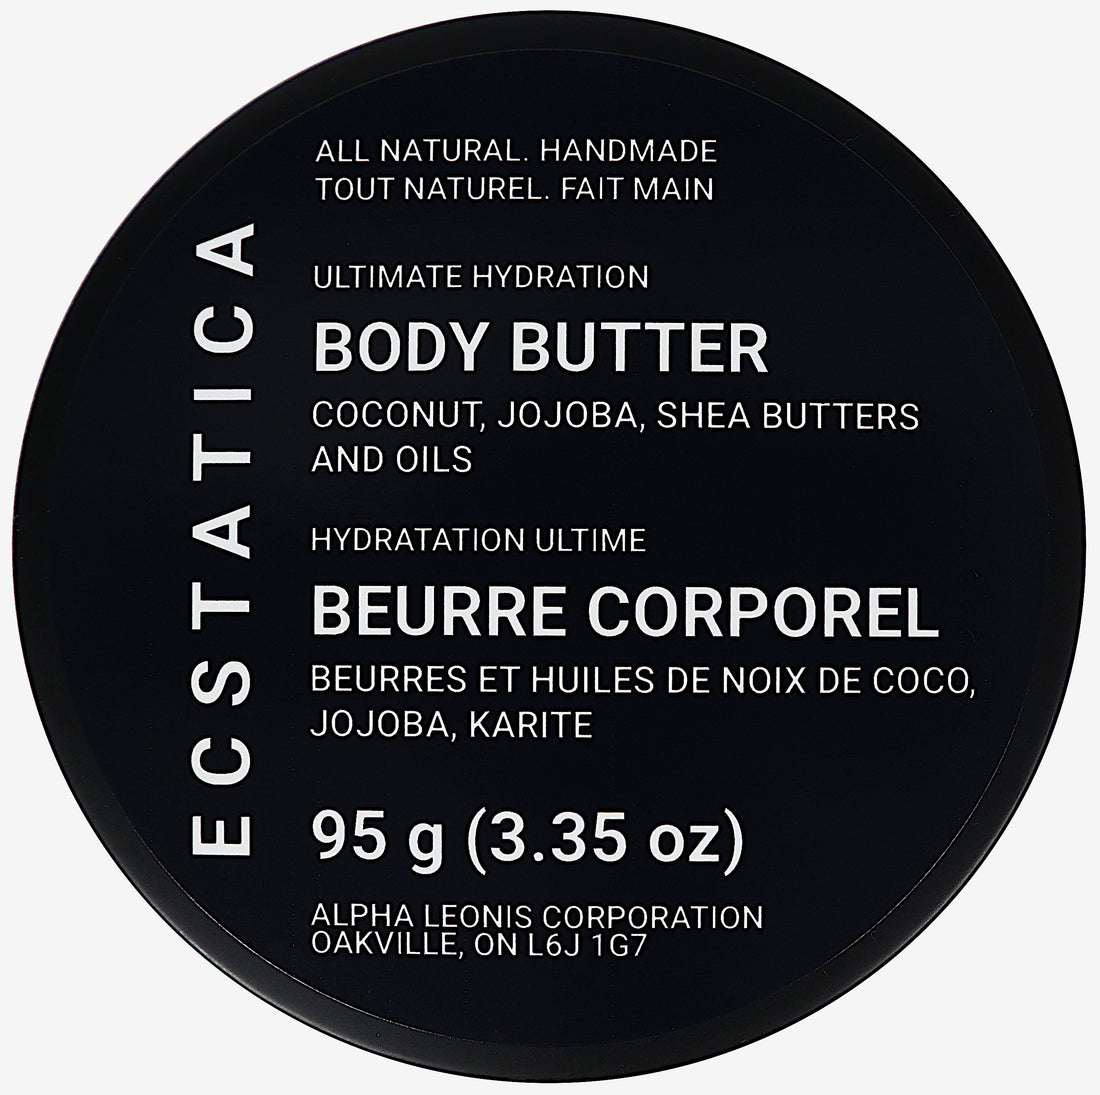 ECSTATICA Canadian All-Natural Handmade Local Ultimate Hydration Body Butter - Coconut Oil, Jojoba Oil, Shea Butter 95 g (3.35 oz) Top Lid